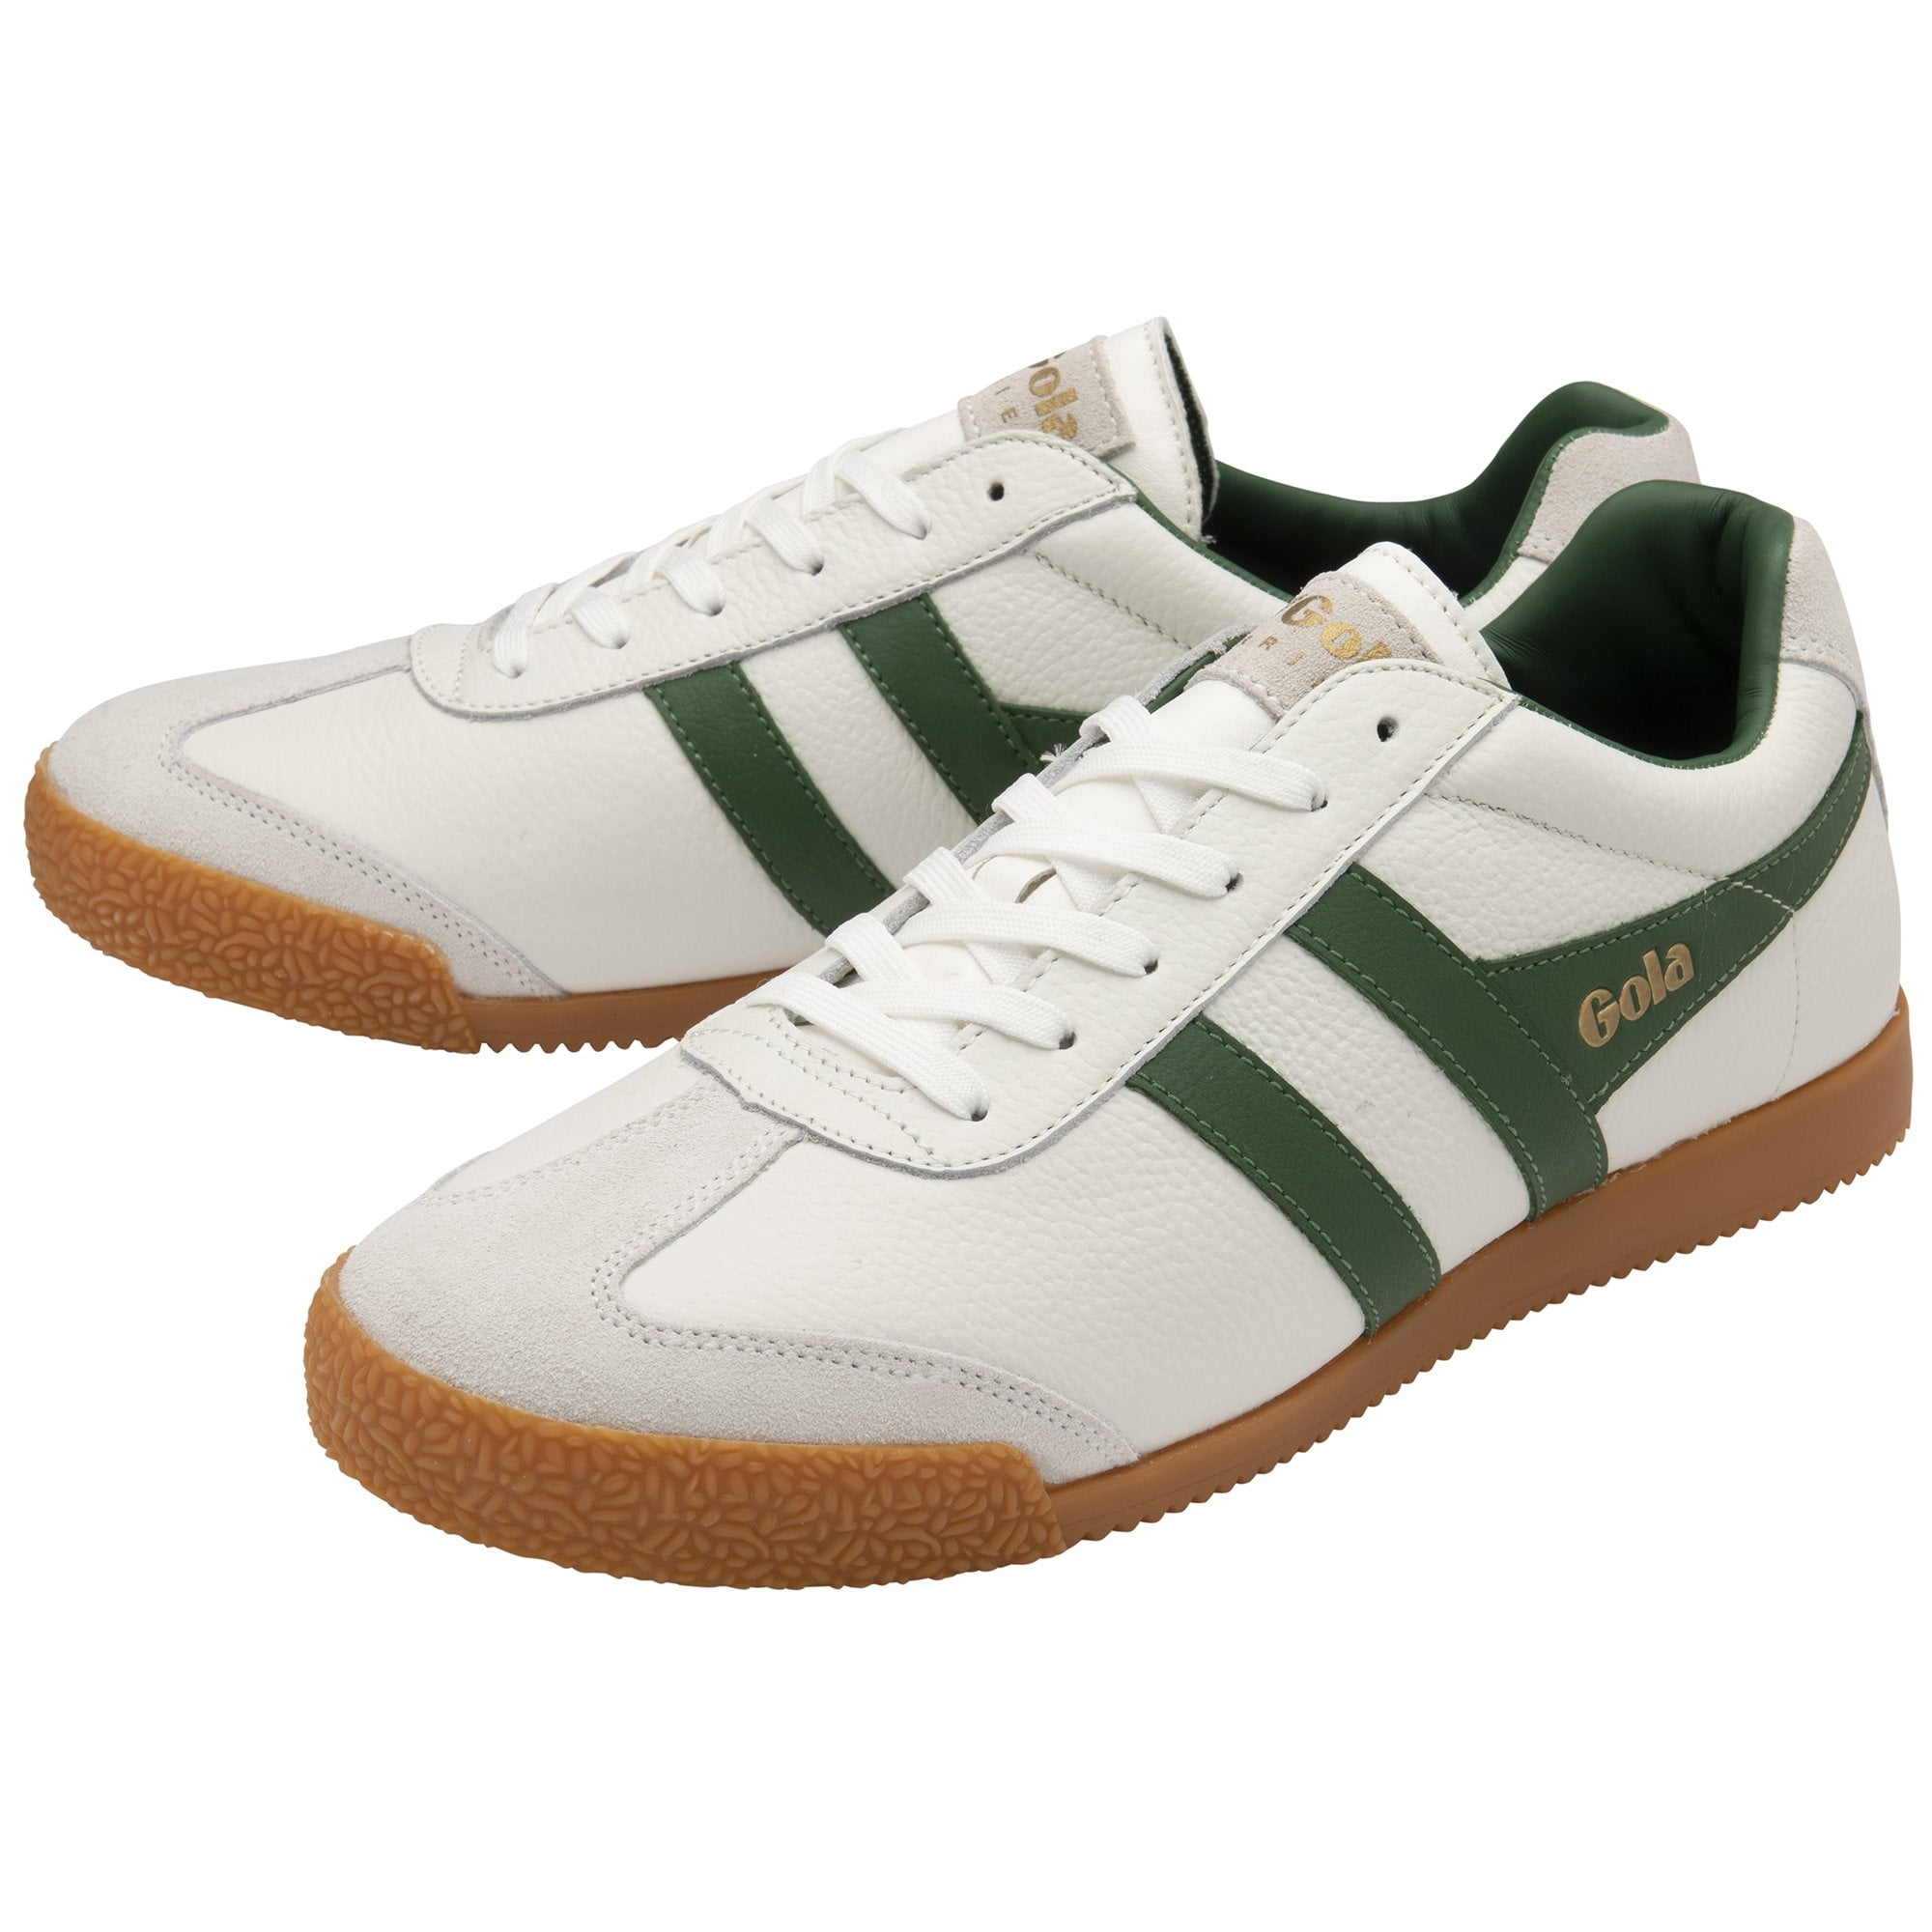 Gola Classics Men's Sneaker Harrier Leather Trainers in White/Green